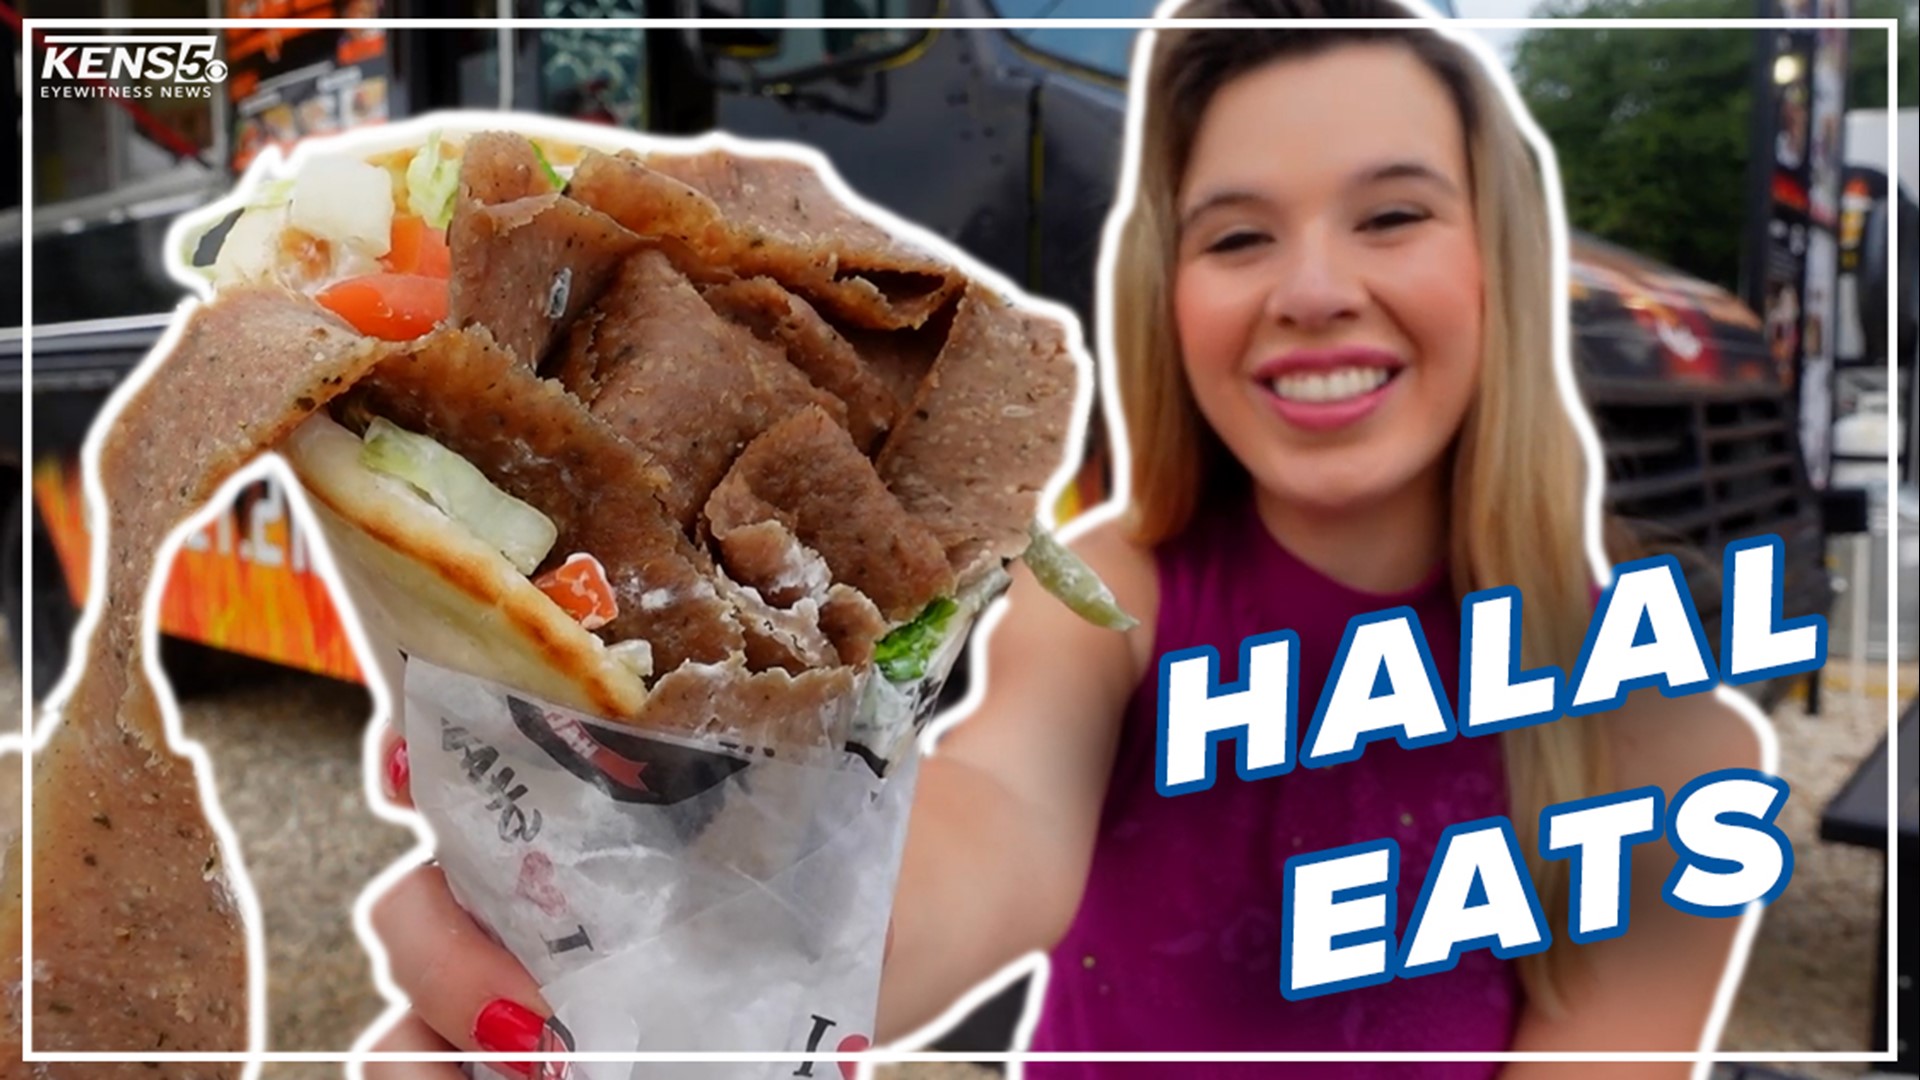 If you're looking for some Halal street eats, we've got you covered at Abu Omar Halal. Lexi Hazlett takes you there on this week's Food Truck Frenzy.